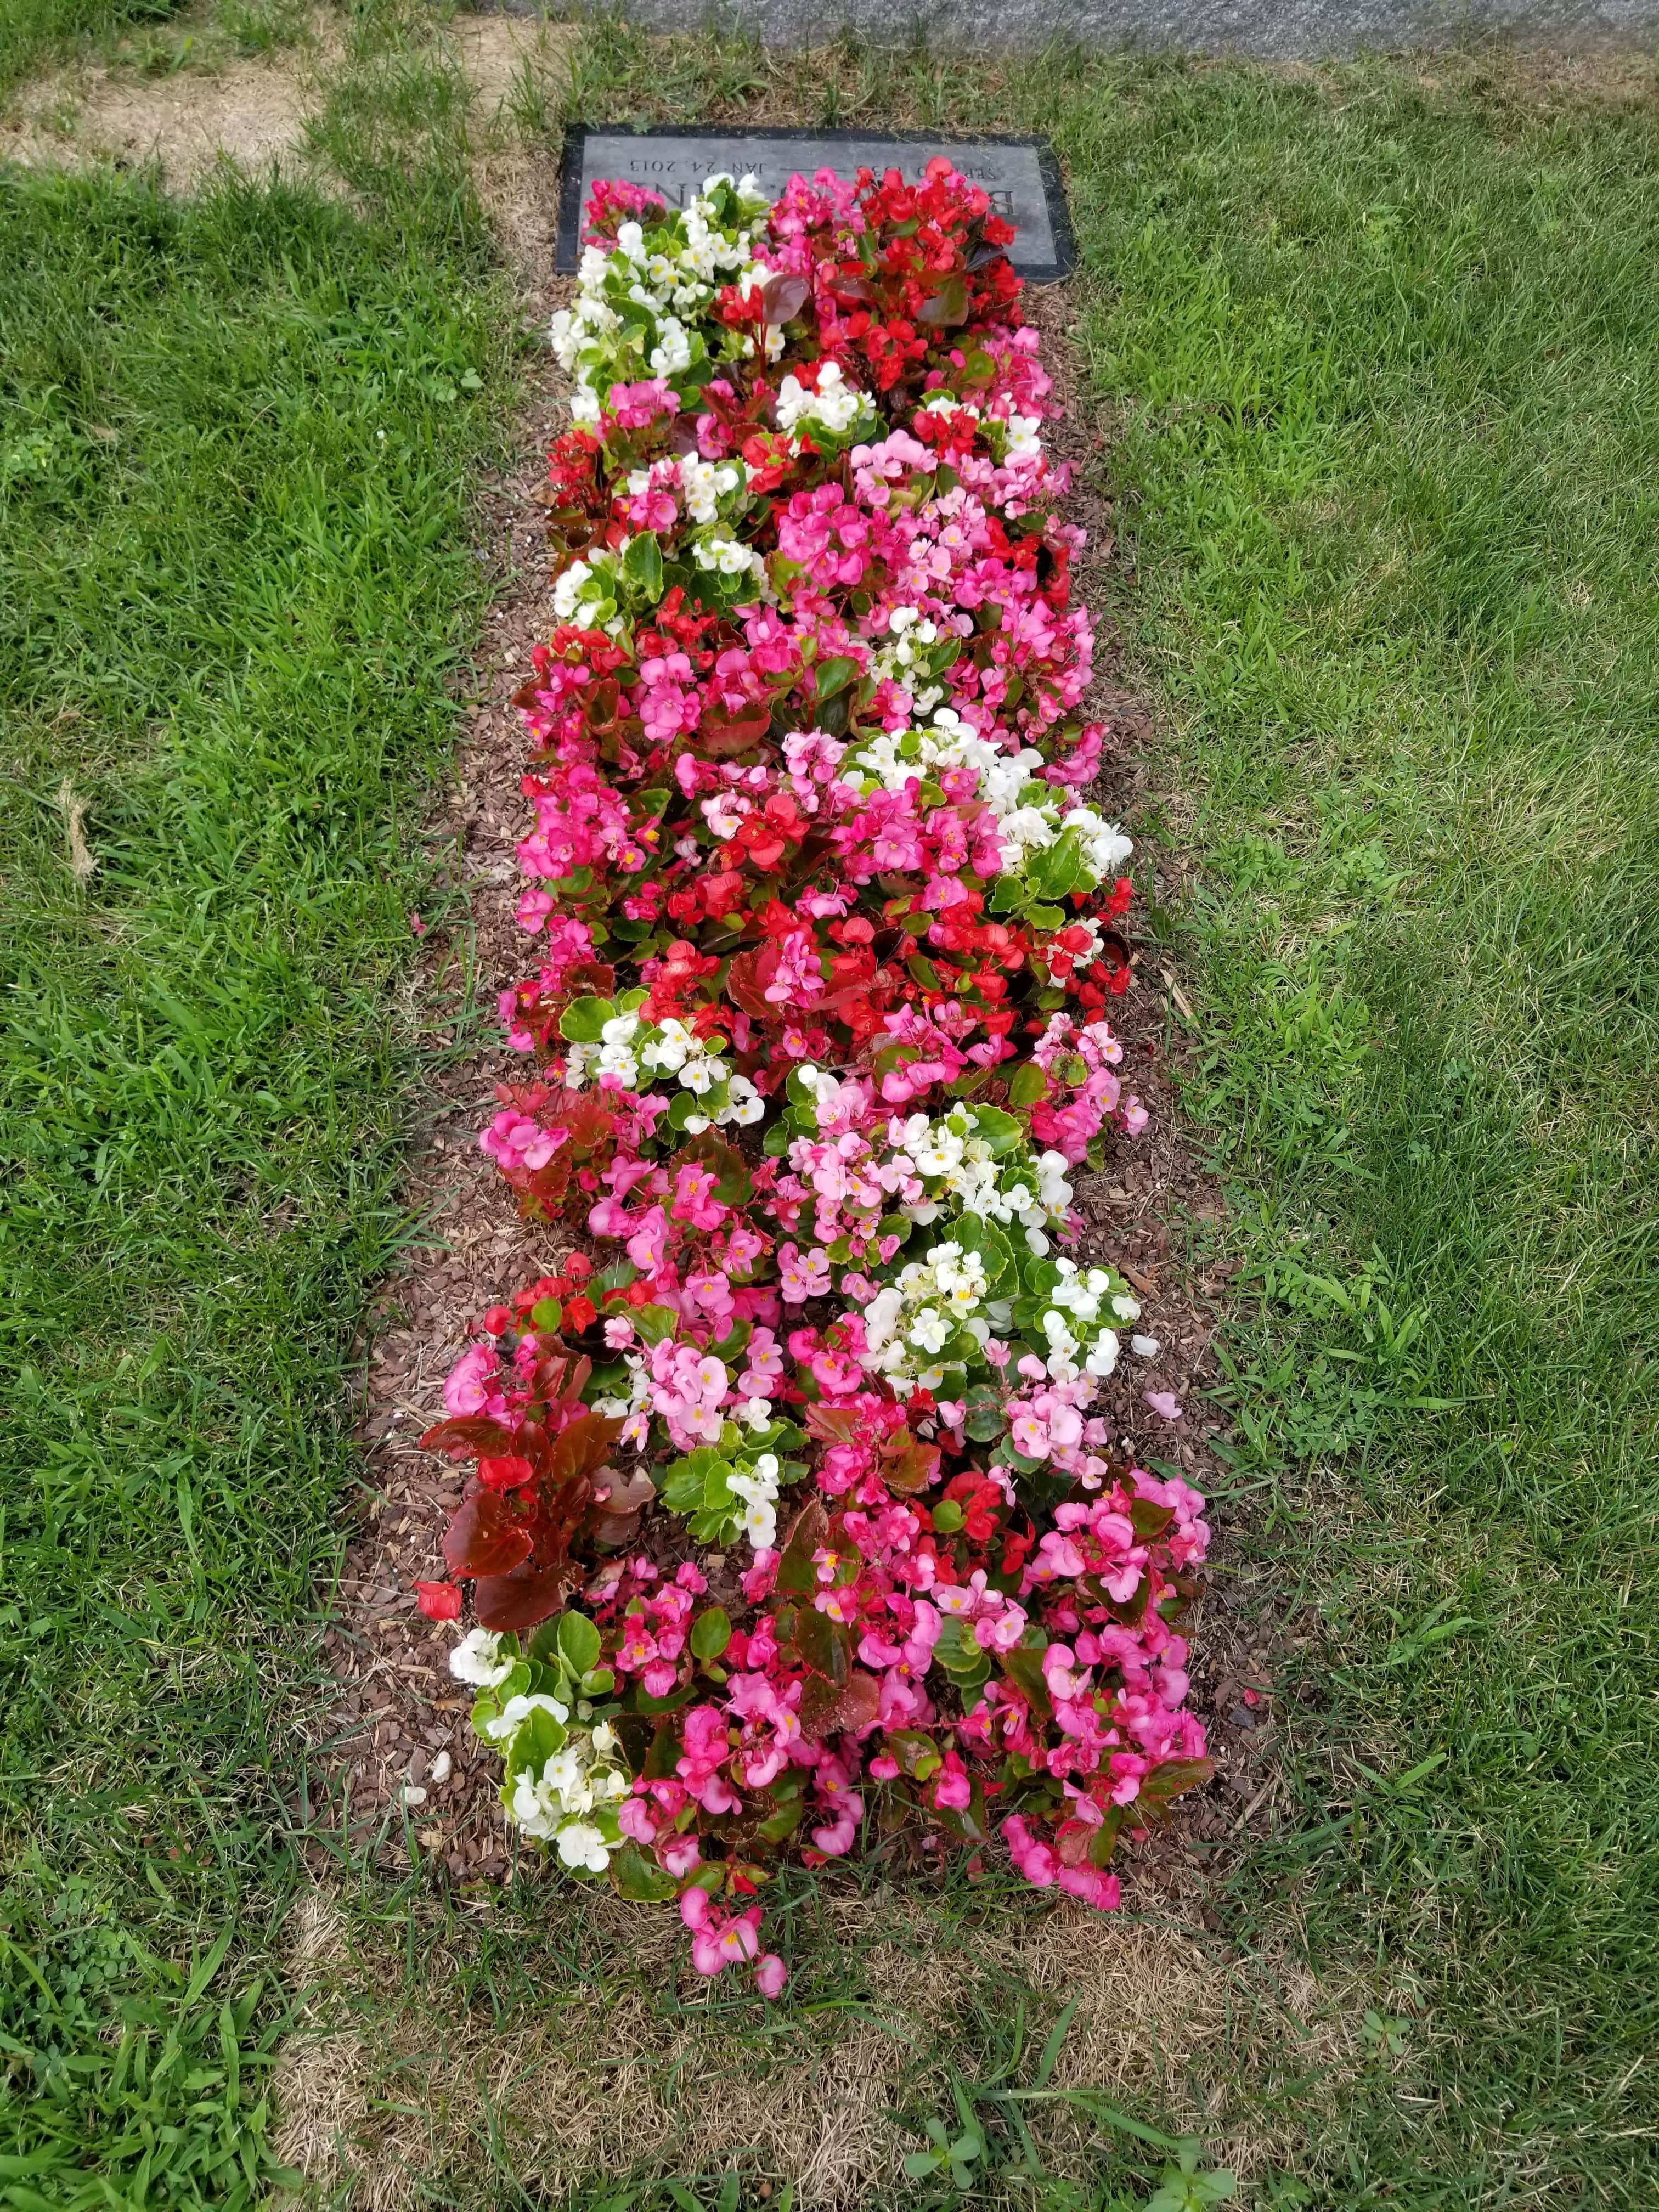 Begonias planted on a Memorial site at Memorial Park Cemetery